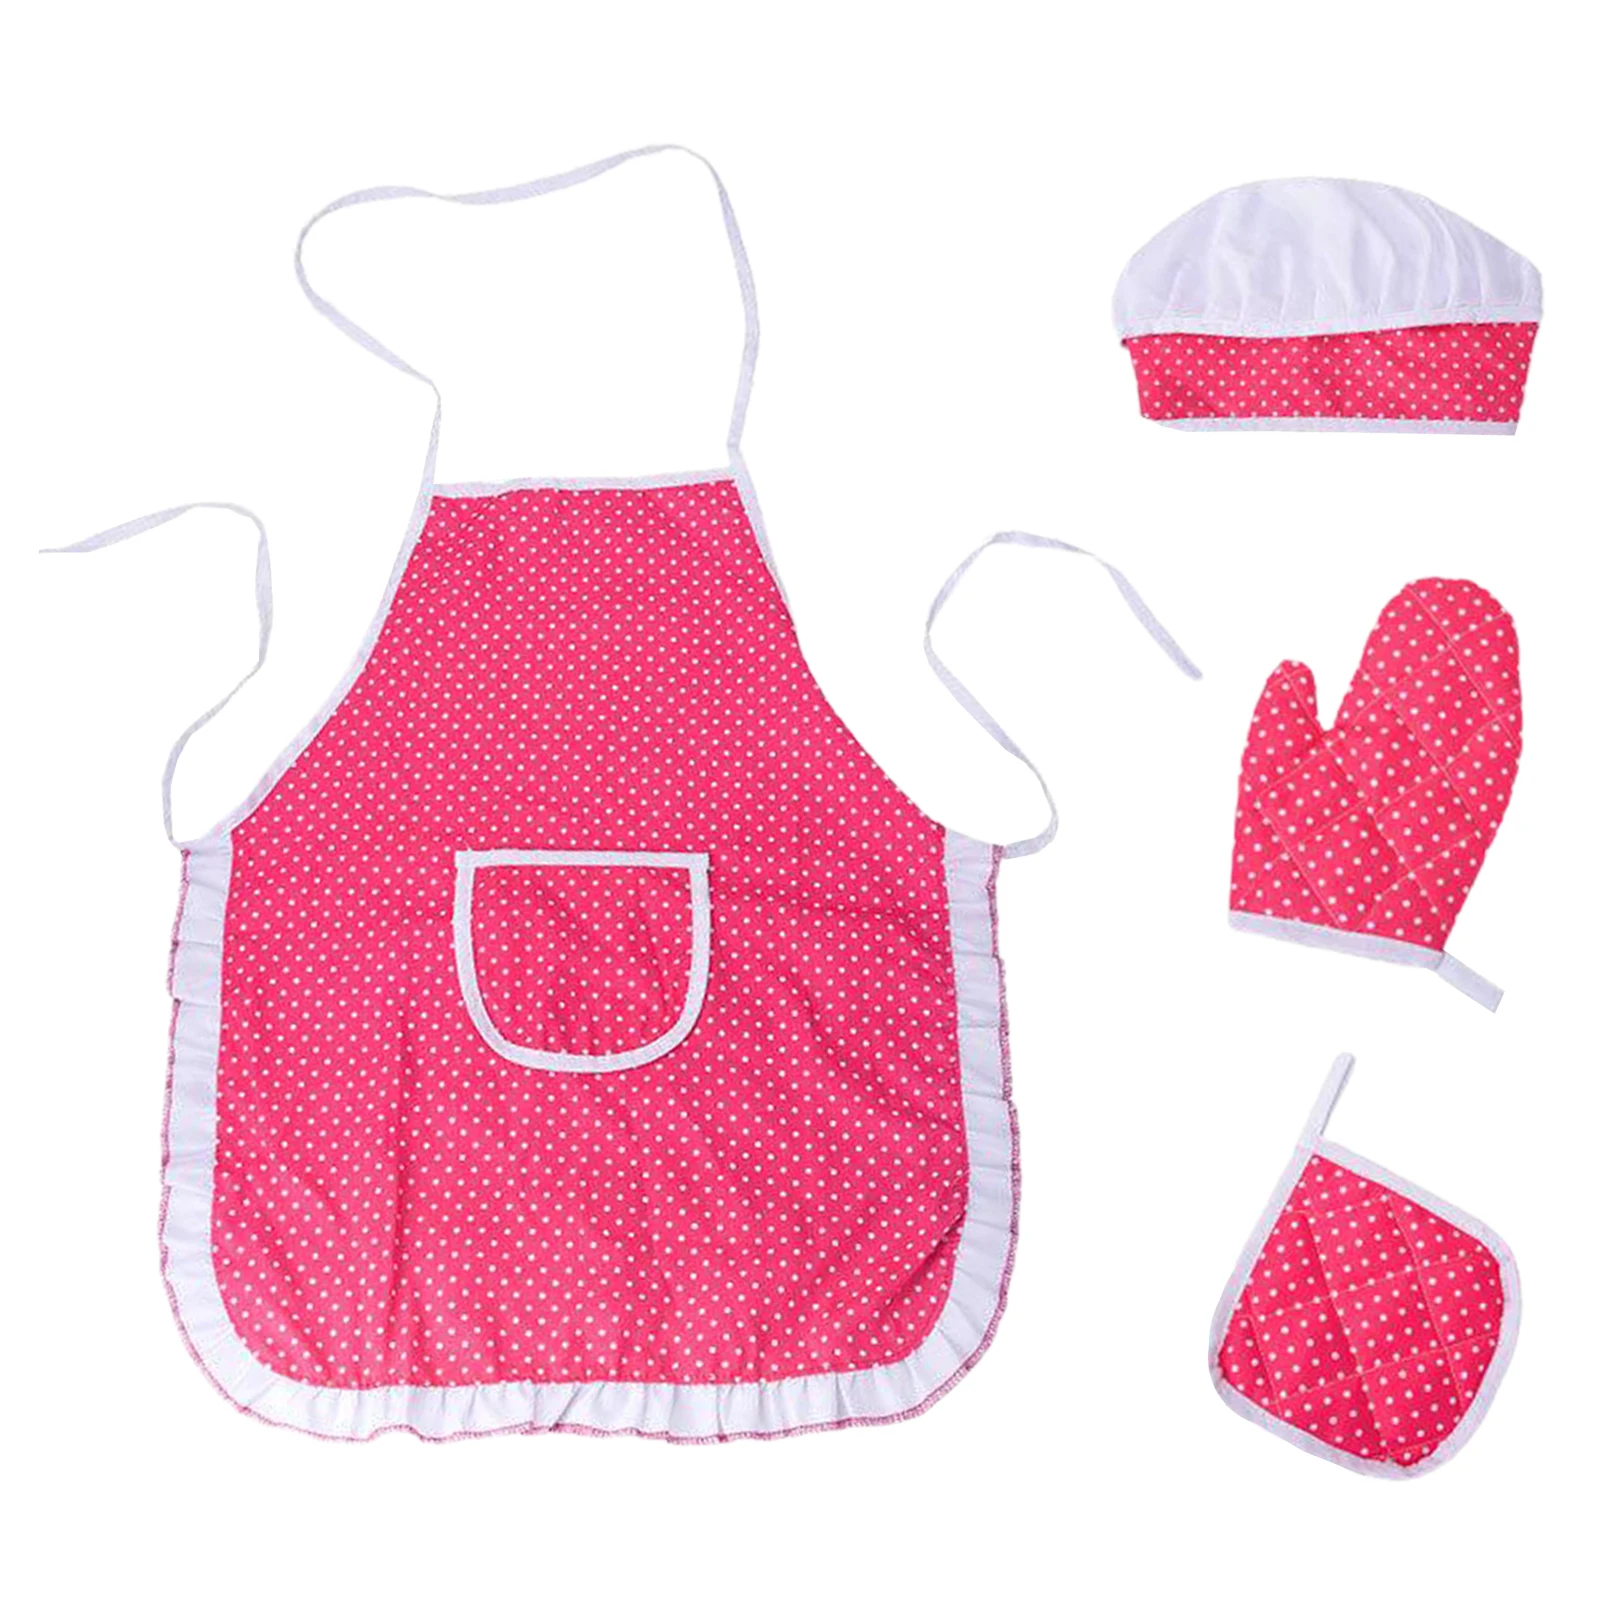 Children Chef Set DIY Cooking Baking Suit Toys Set New Pretend Play Apron Gloves Cooker Gift for Kids